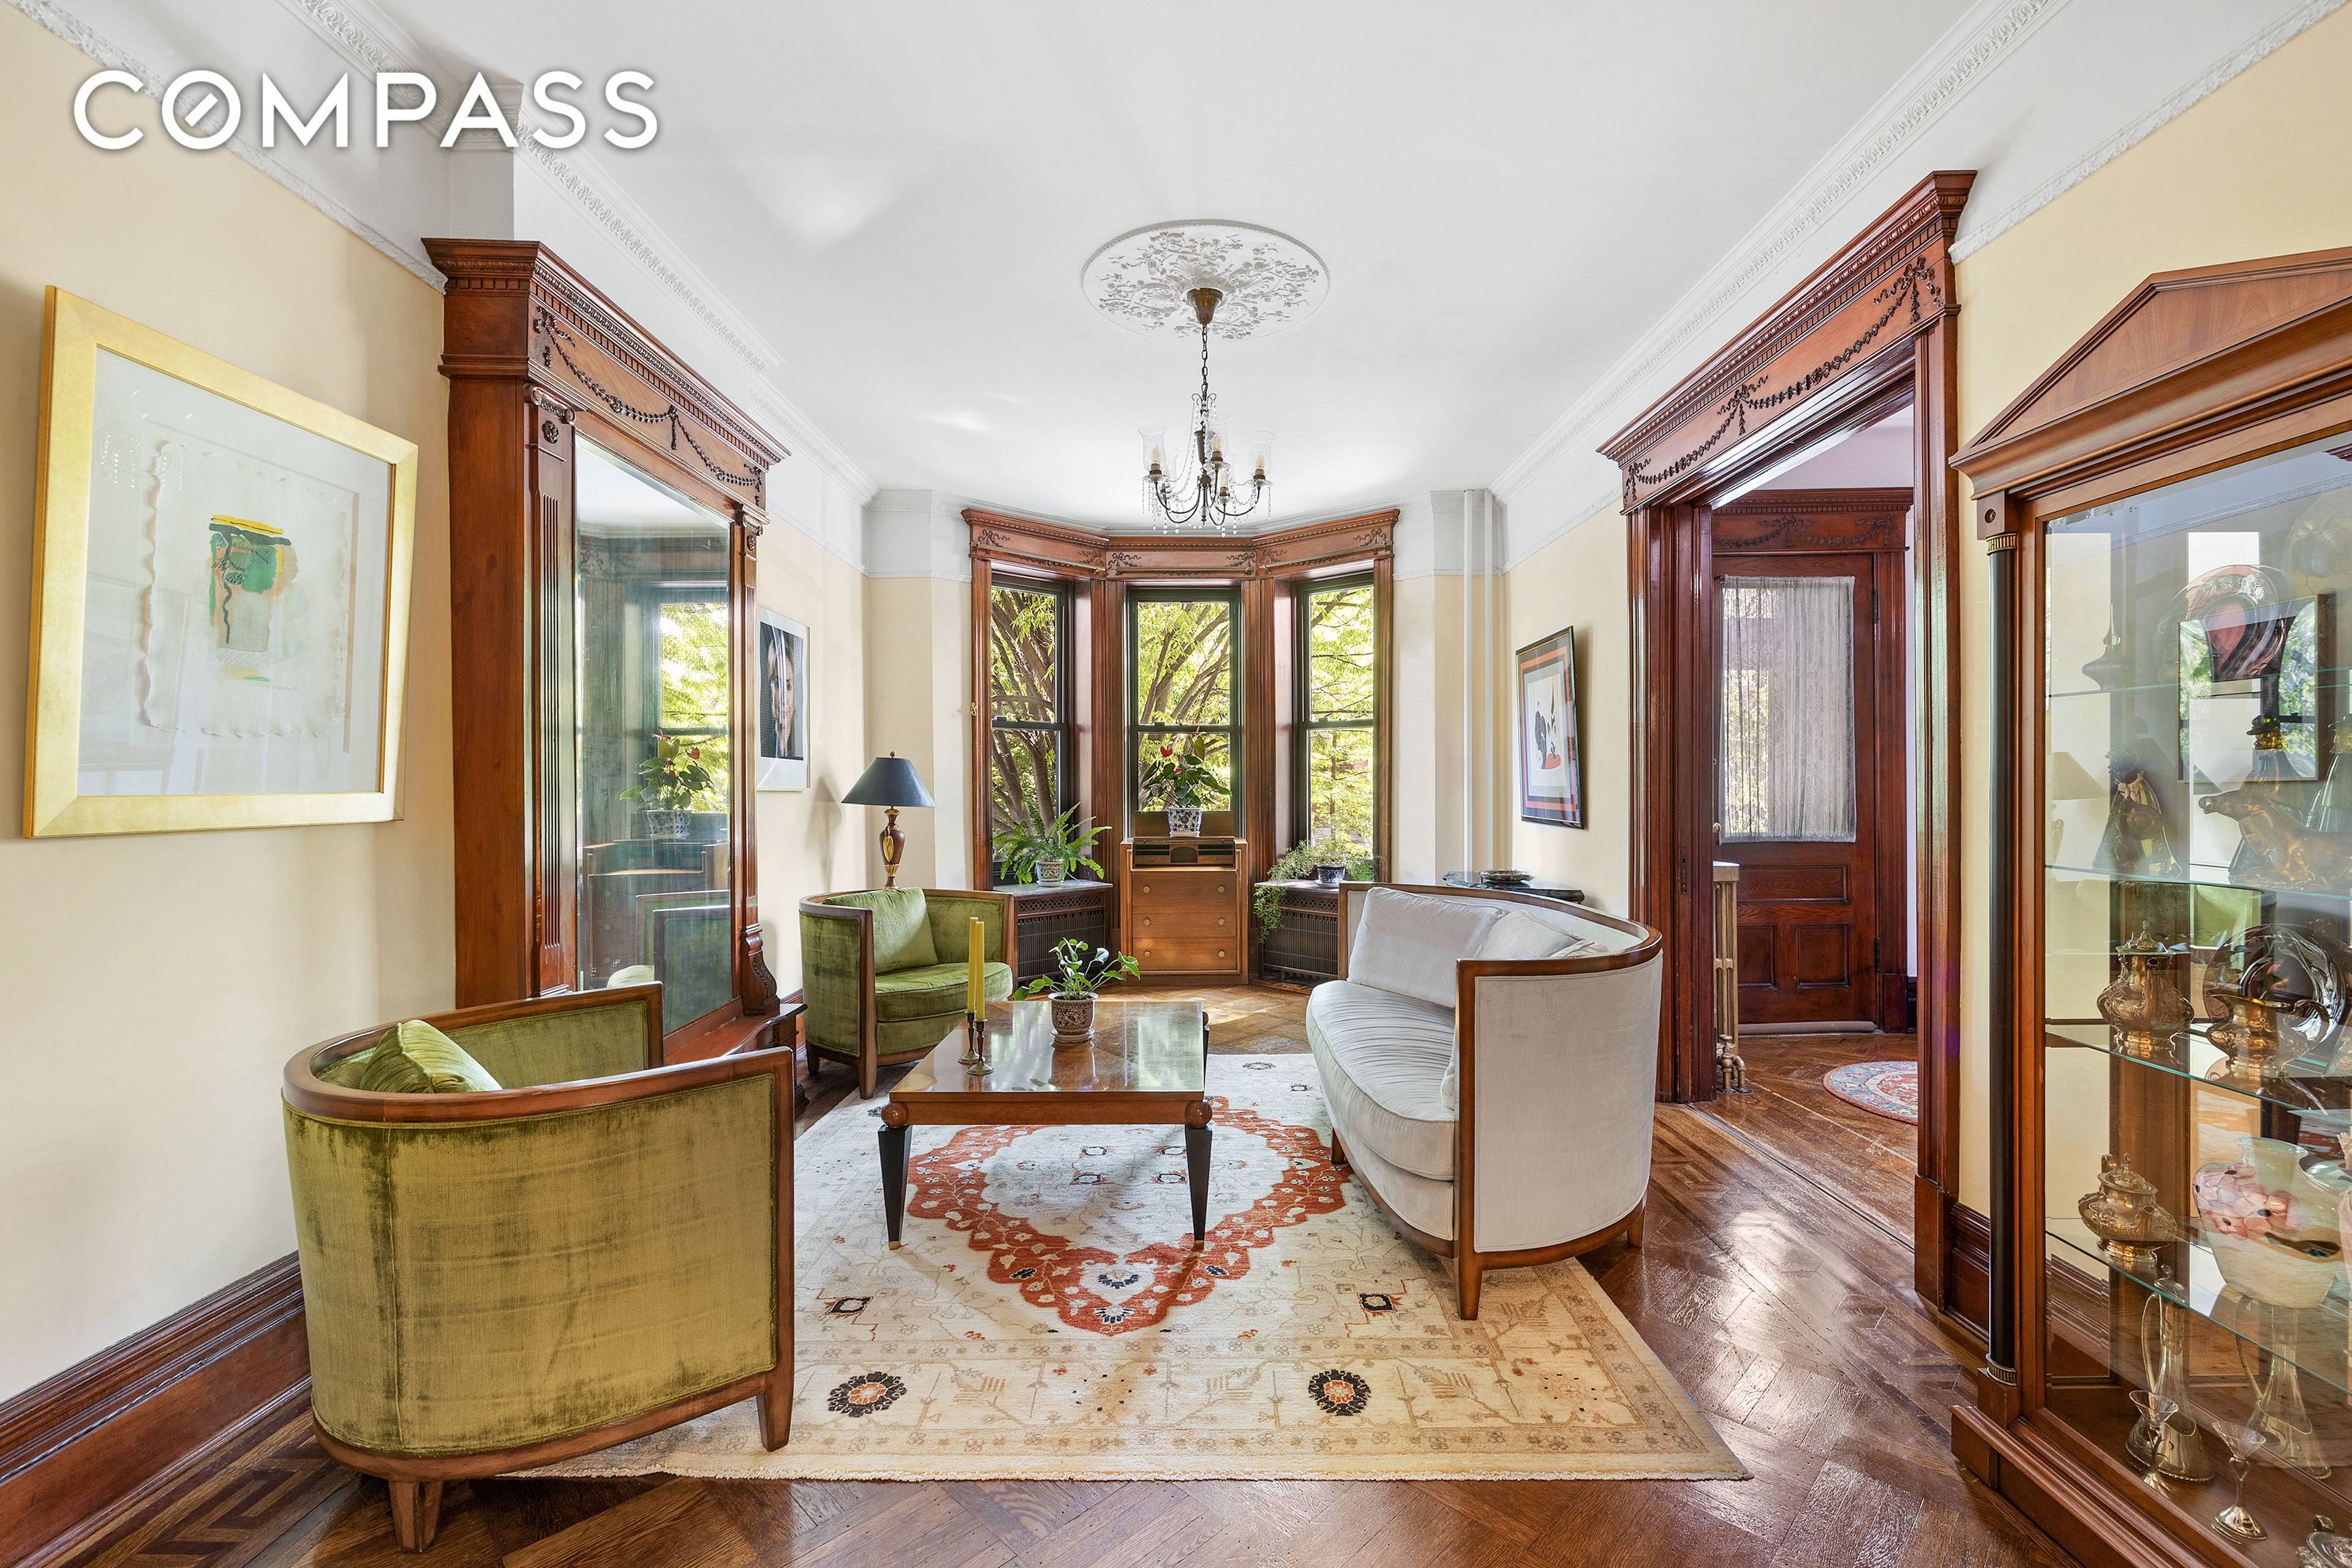 This spectacularly renovated, barrel front brick home with well preserved original details sits on a coveted block in Windsor Terrace steps from Prospect Park.